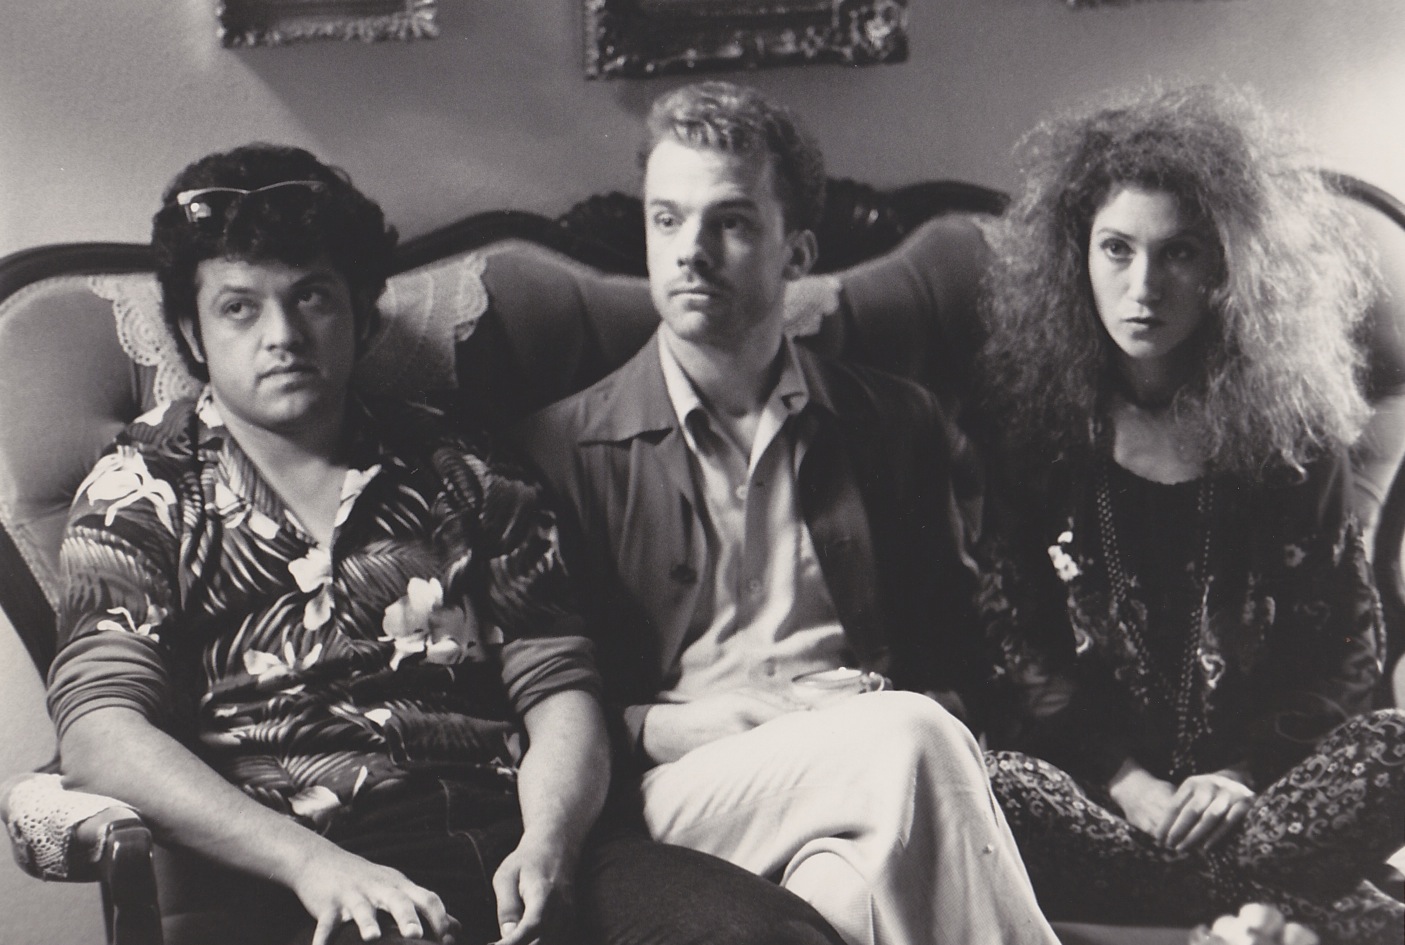 Elizabeth Arlen, Paul Rodriguez and Michael O'Keefe. Still from The Whopee Boys.